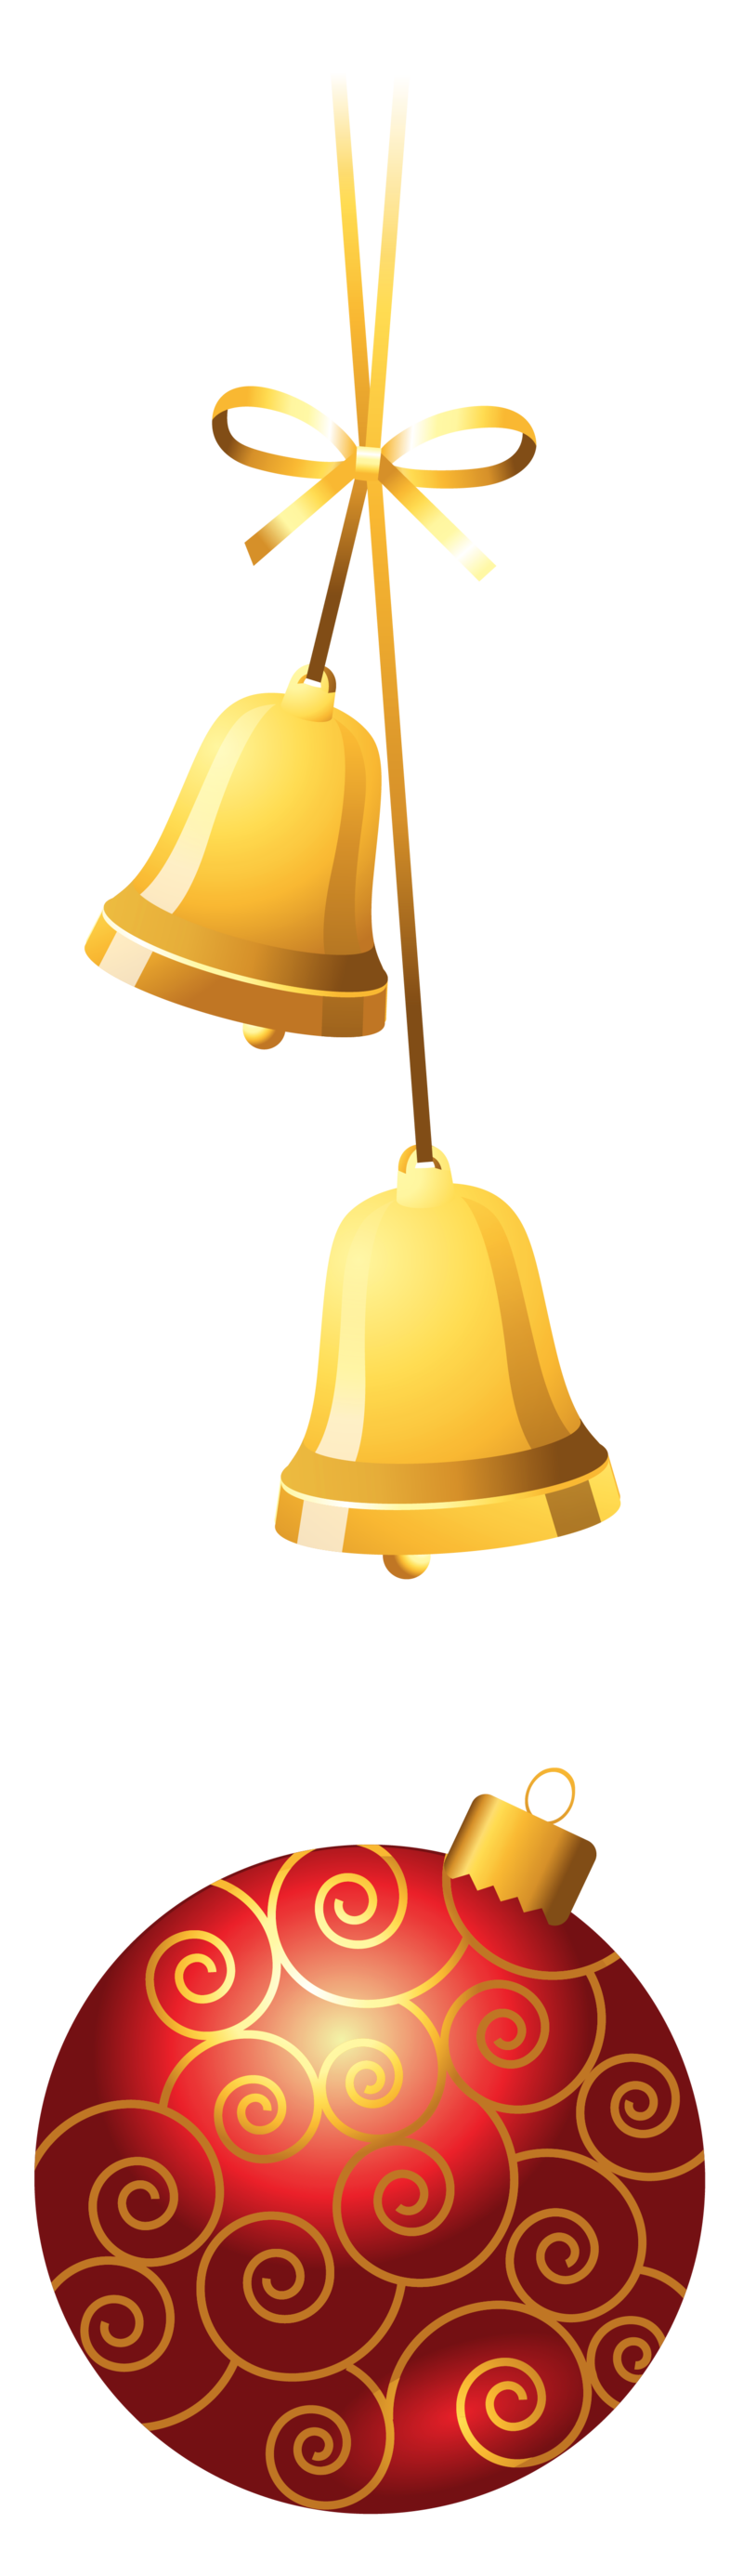 Christmas_Bells_and_Ball_PNG_Picture.png